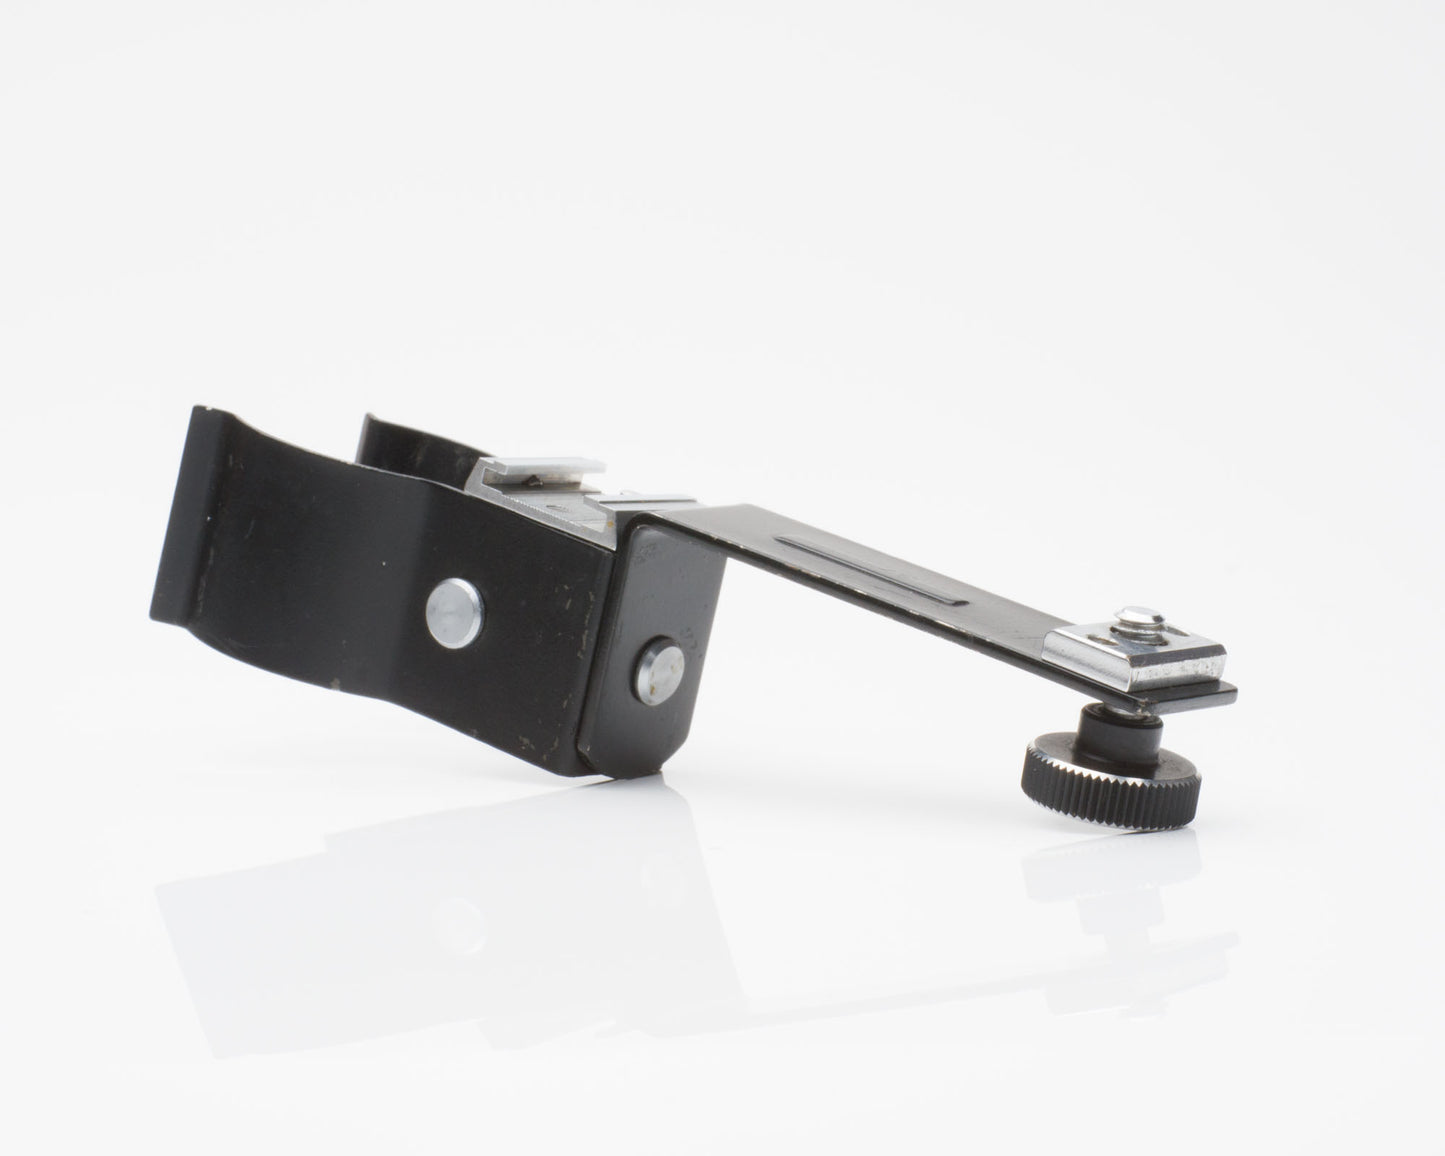 Hasselblad Adjustable Clamp Flash Arm Bracket For Left Hand Grips 45039